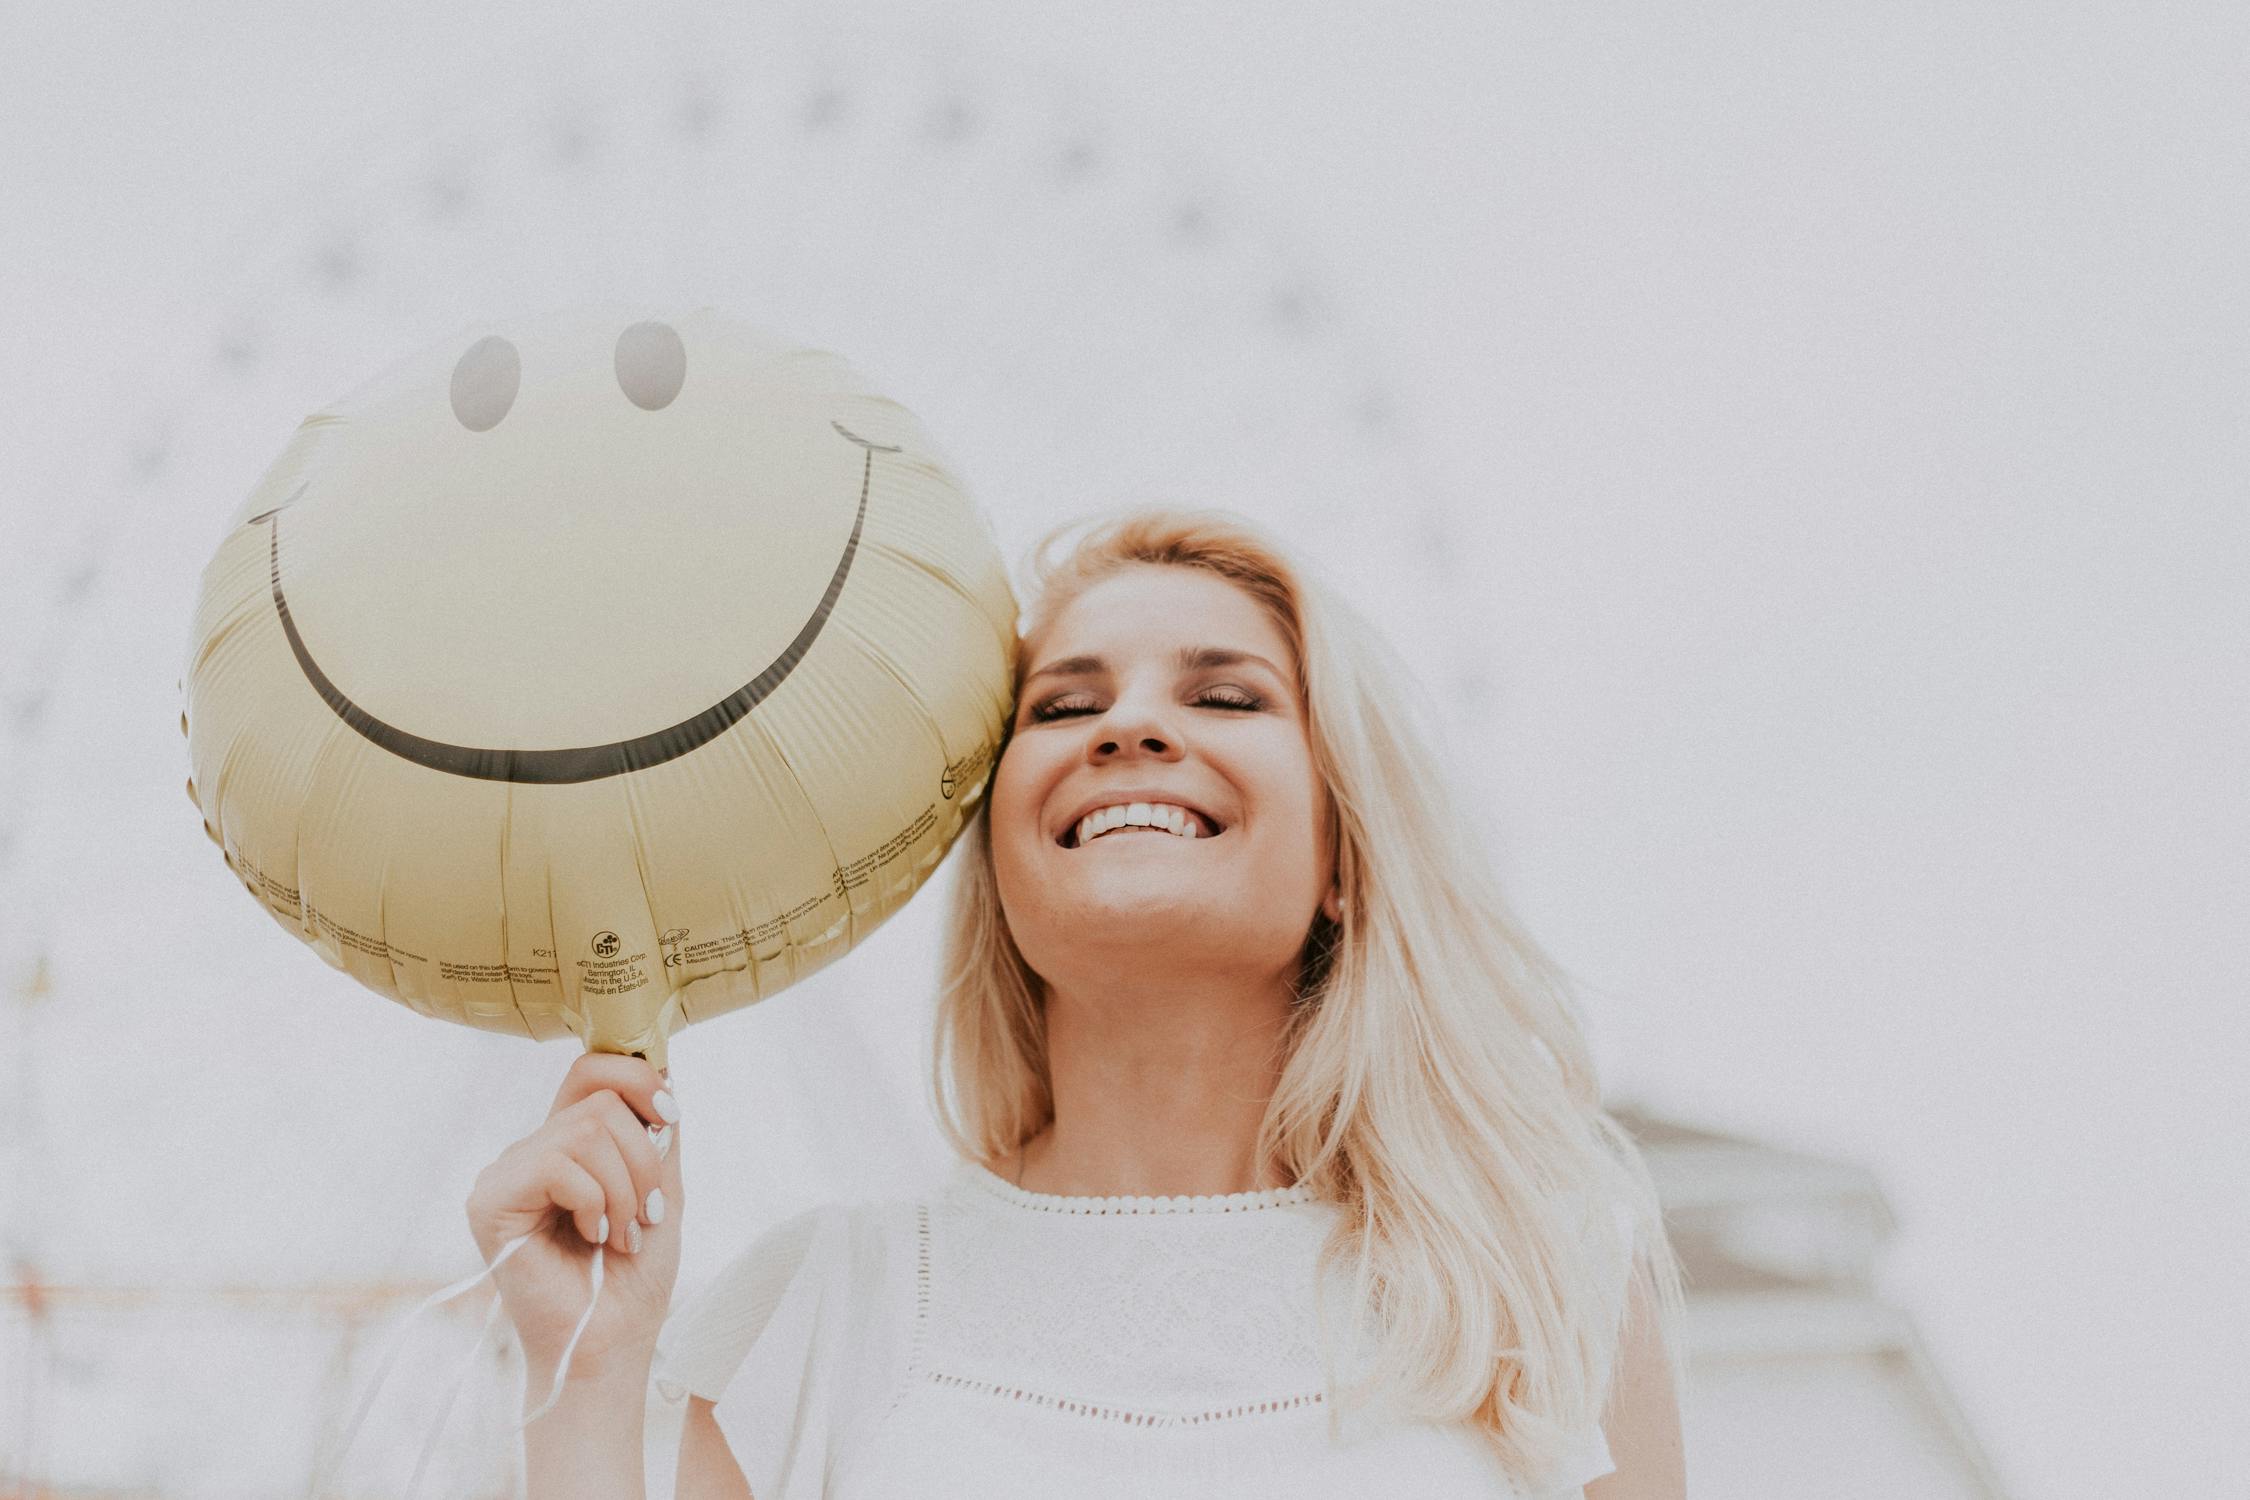 Image of a woman holding a smiley balloon 